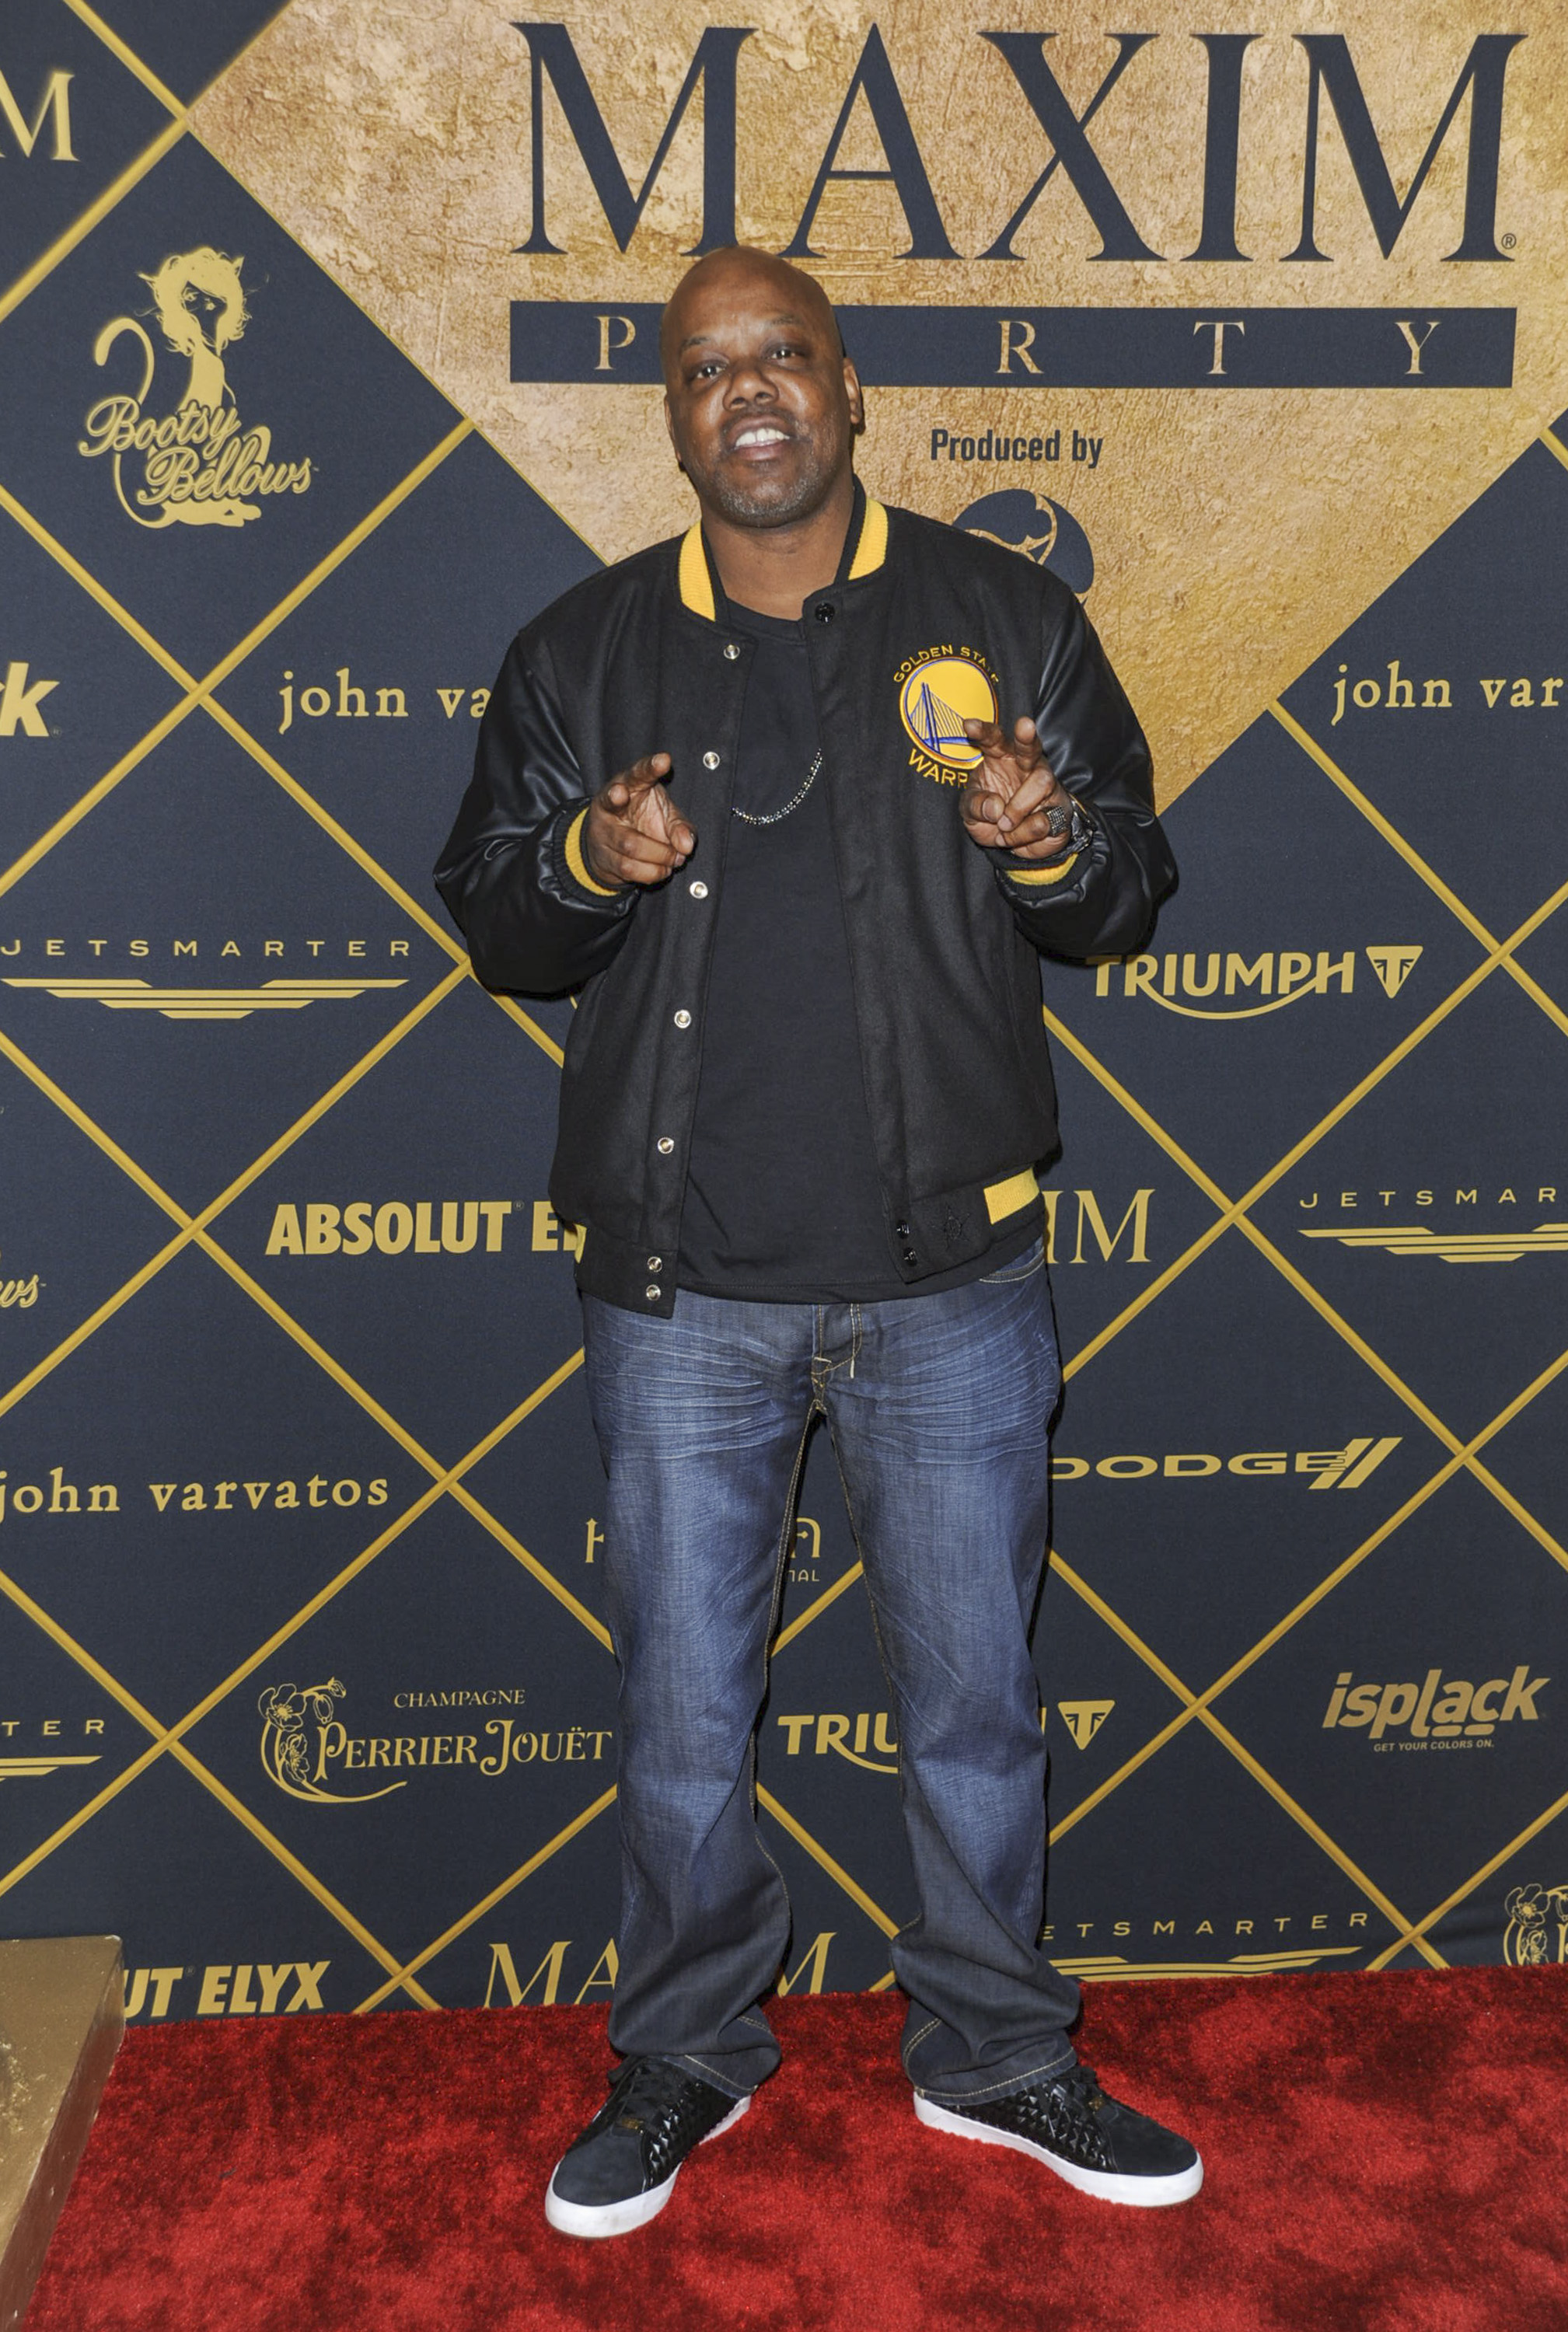 SAN FRANCISCO, CA - FEBRUARY 06: Too Short attends The 2016 Maxim Party With Bootsy Bellows at Treasure Island on February 6, 2016 in San Francisco, California. (Photo by Lilly Lawrence/Getty Images) *** Local Caption *** Too Short